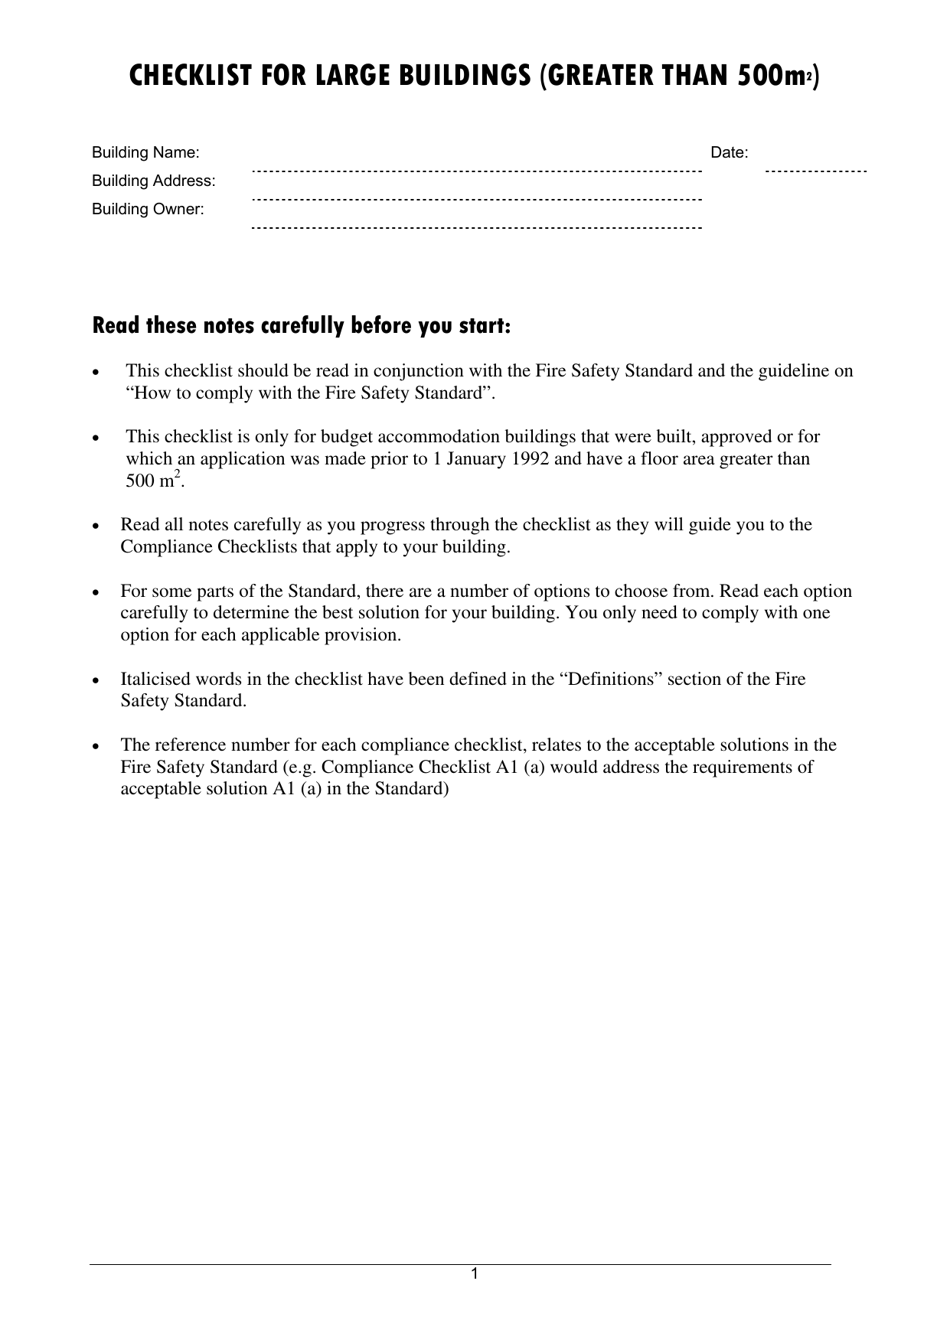 Checklist for Large Buildings (Greater Than 500m2) - Queensland, Australia, Page 1